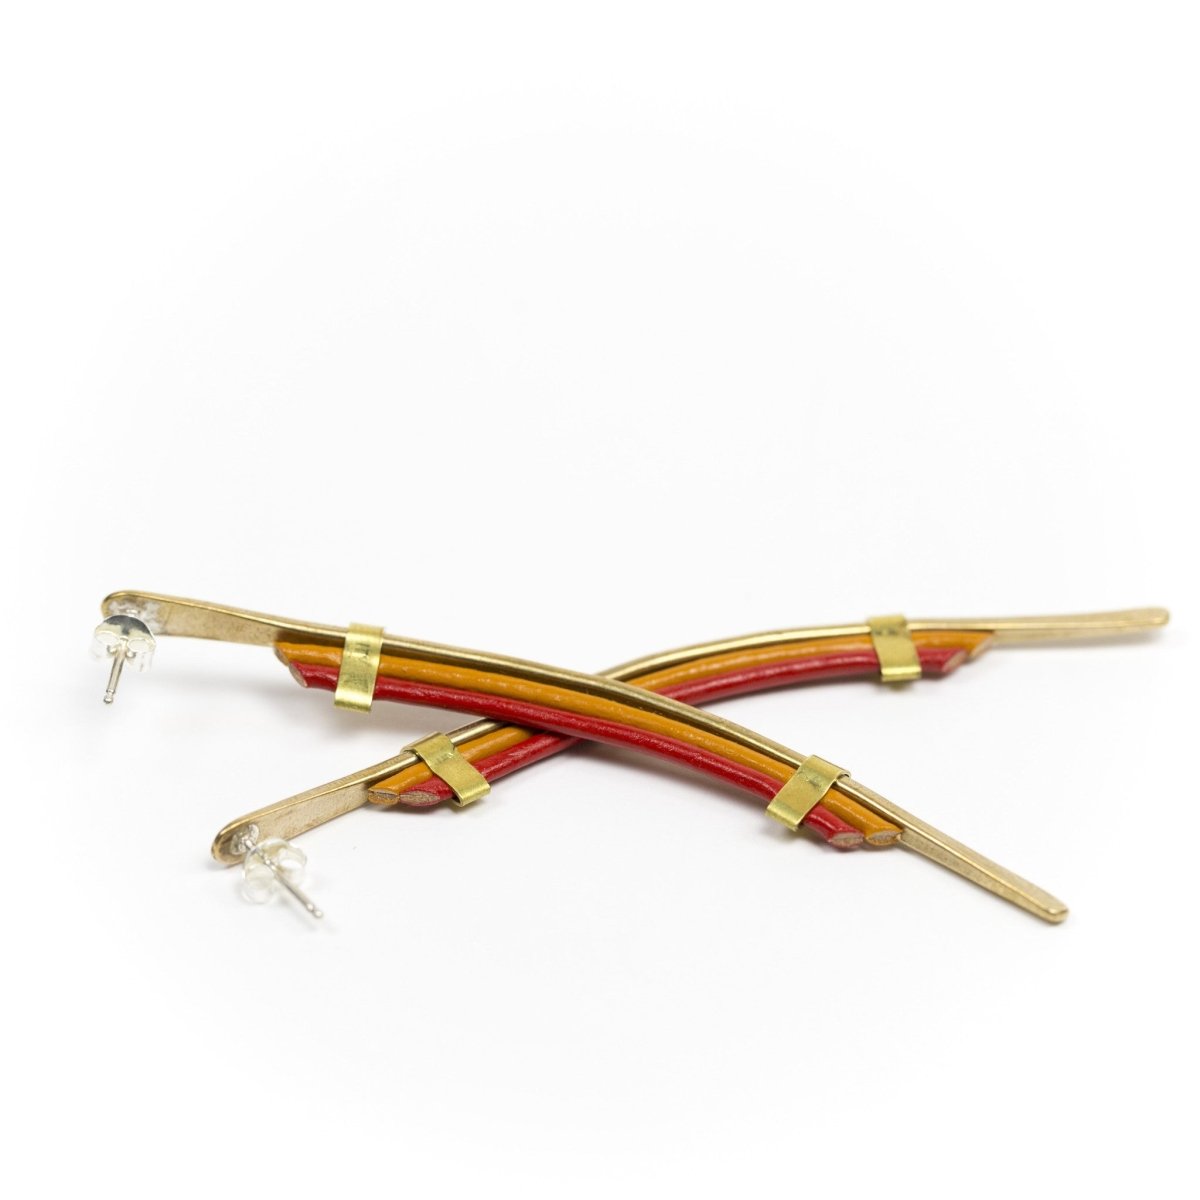 Long spear shaped gold earrings with sterling silver posts and red leather accents.